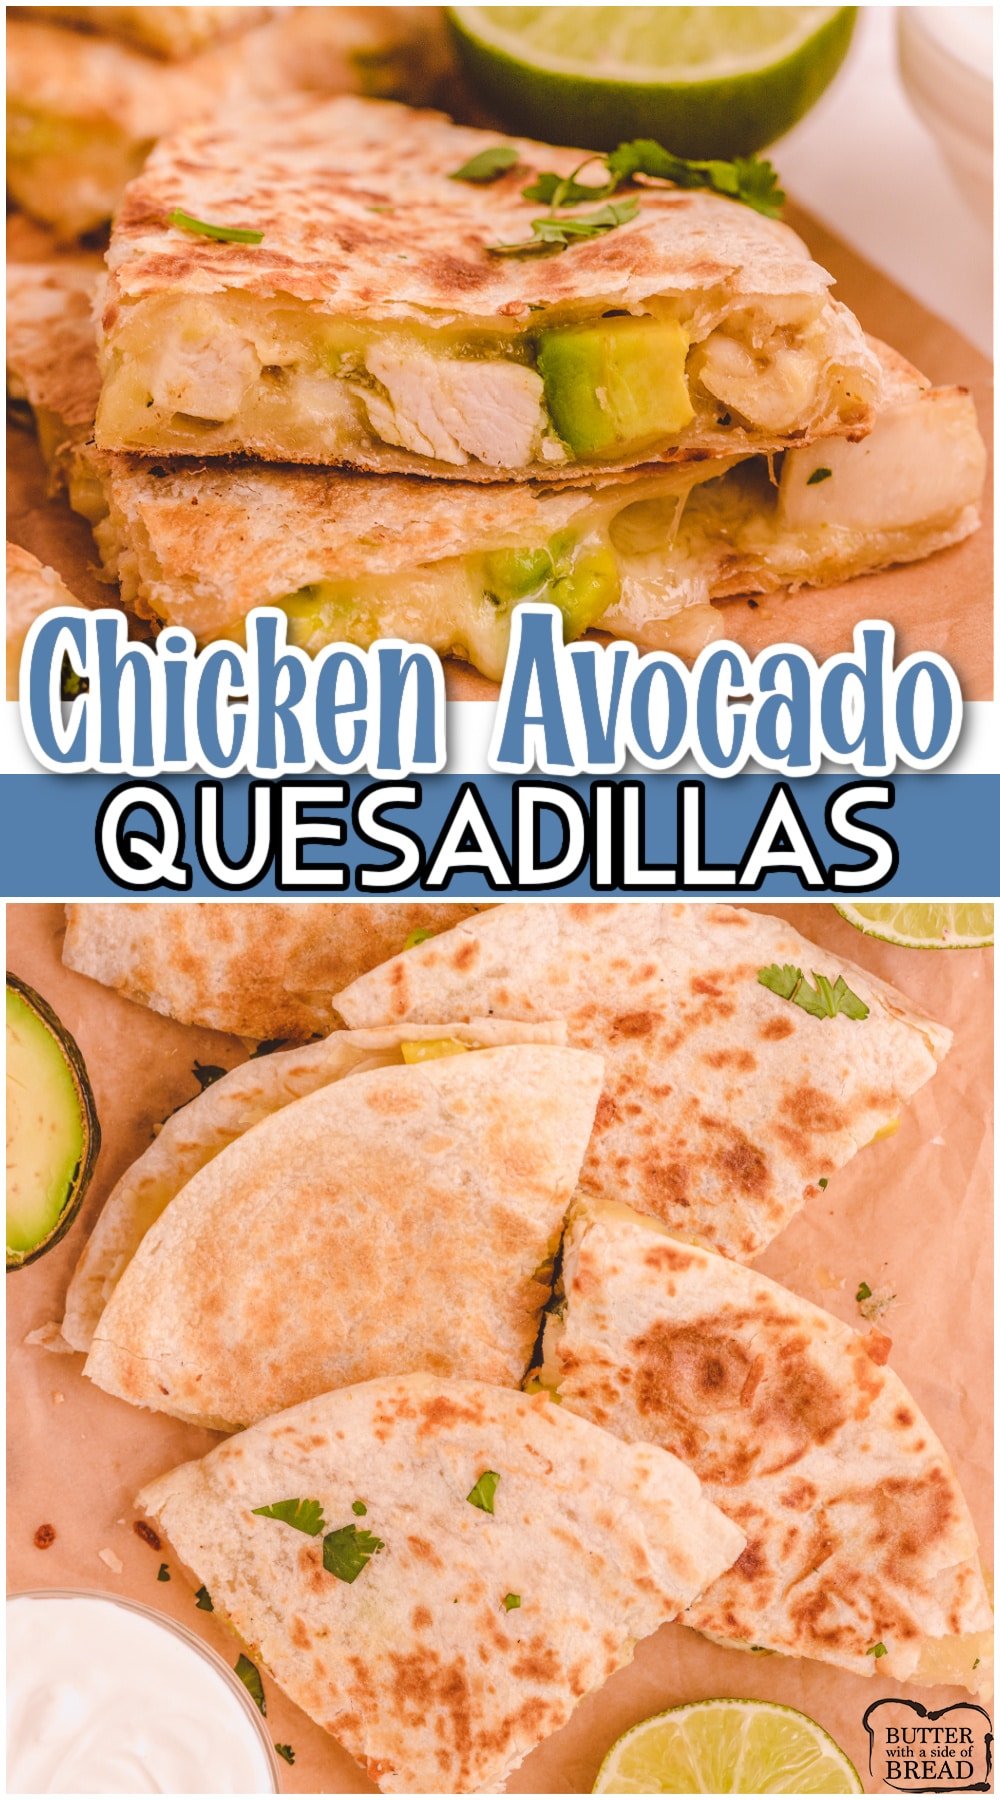 Chicken avocado quesadillas made with simple ingredients & perfect for parties & game day! Great fresh flavors in this tasty chicken quesadilla recipe!